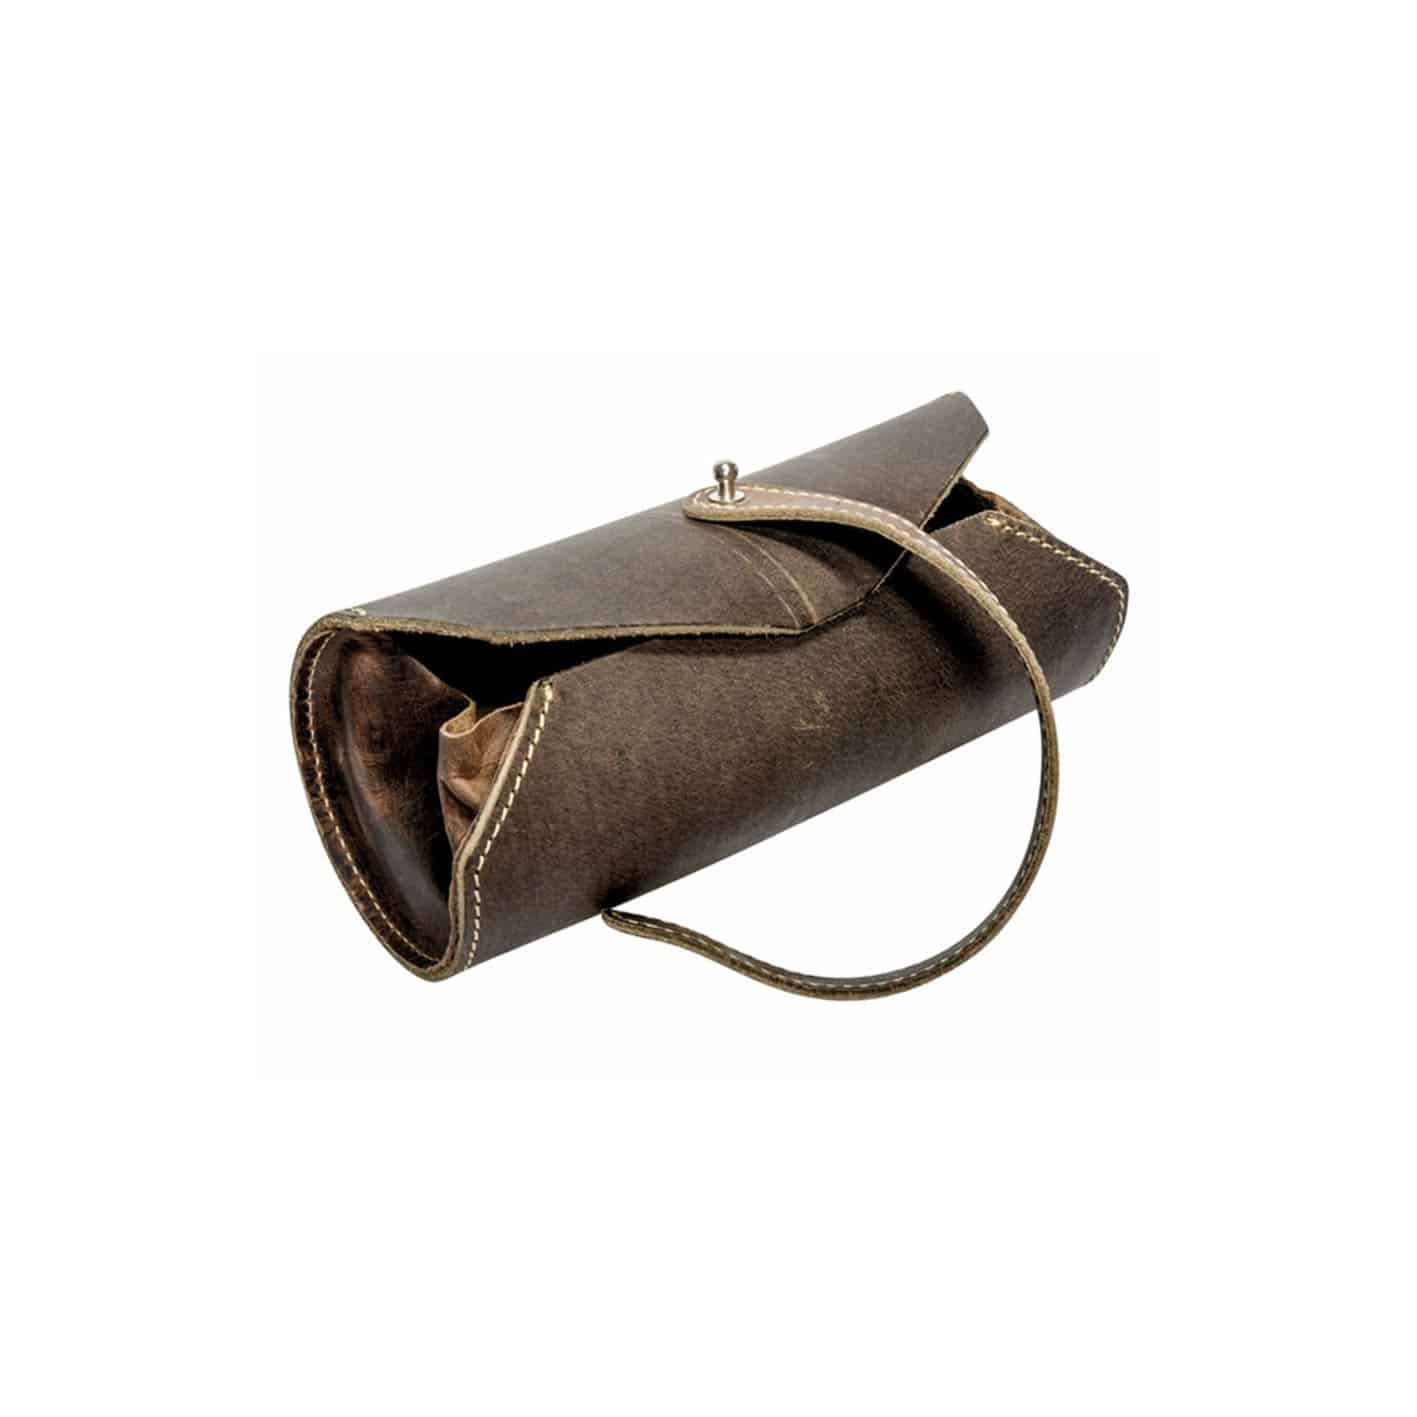 ONLINE ΚΑΣΕΤΙΝΑ (ROLL POUCH) CREATIVE LETTERING VINTAGE LEATHER